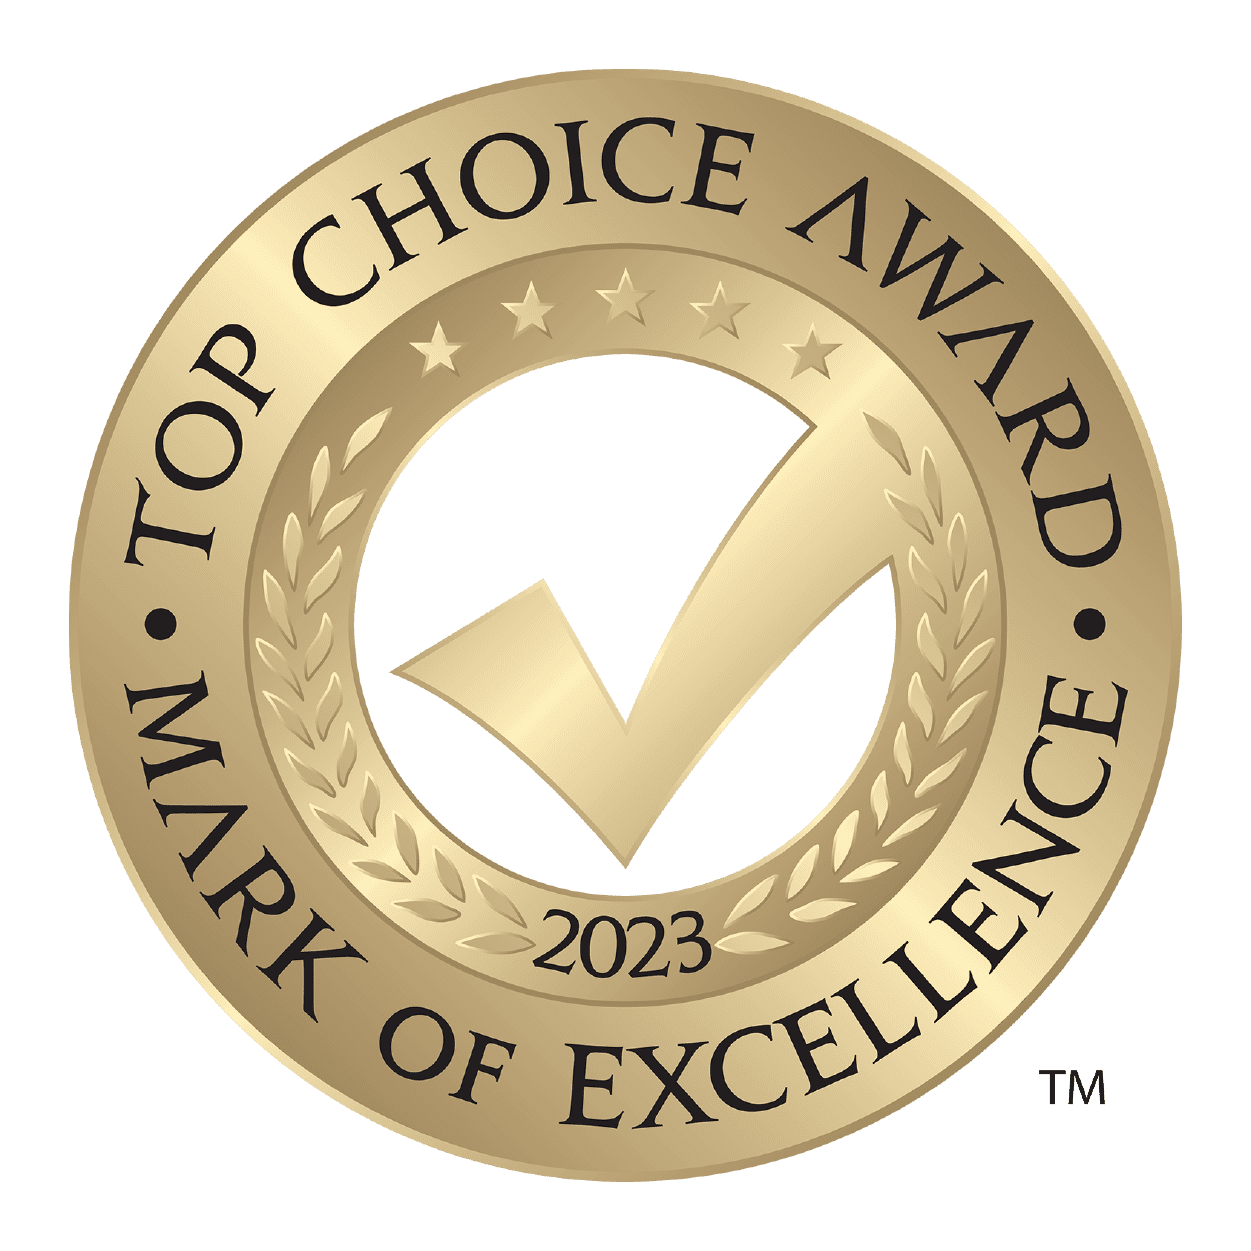 Top Choice Childcare in the GTA Award 2023